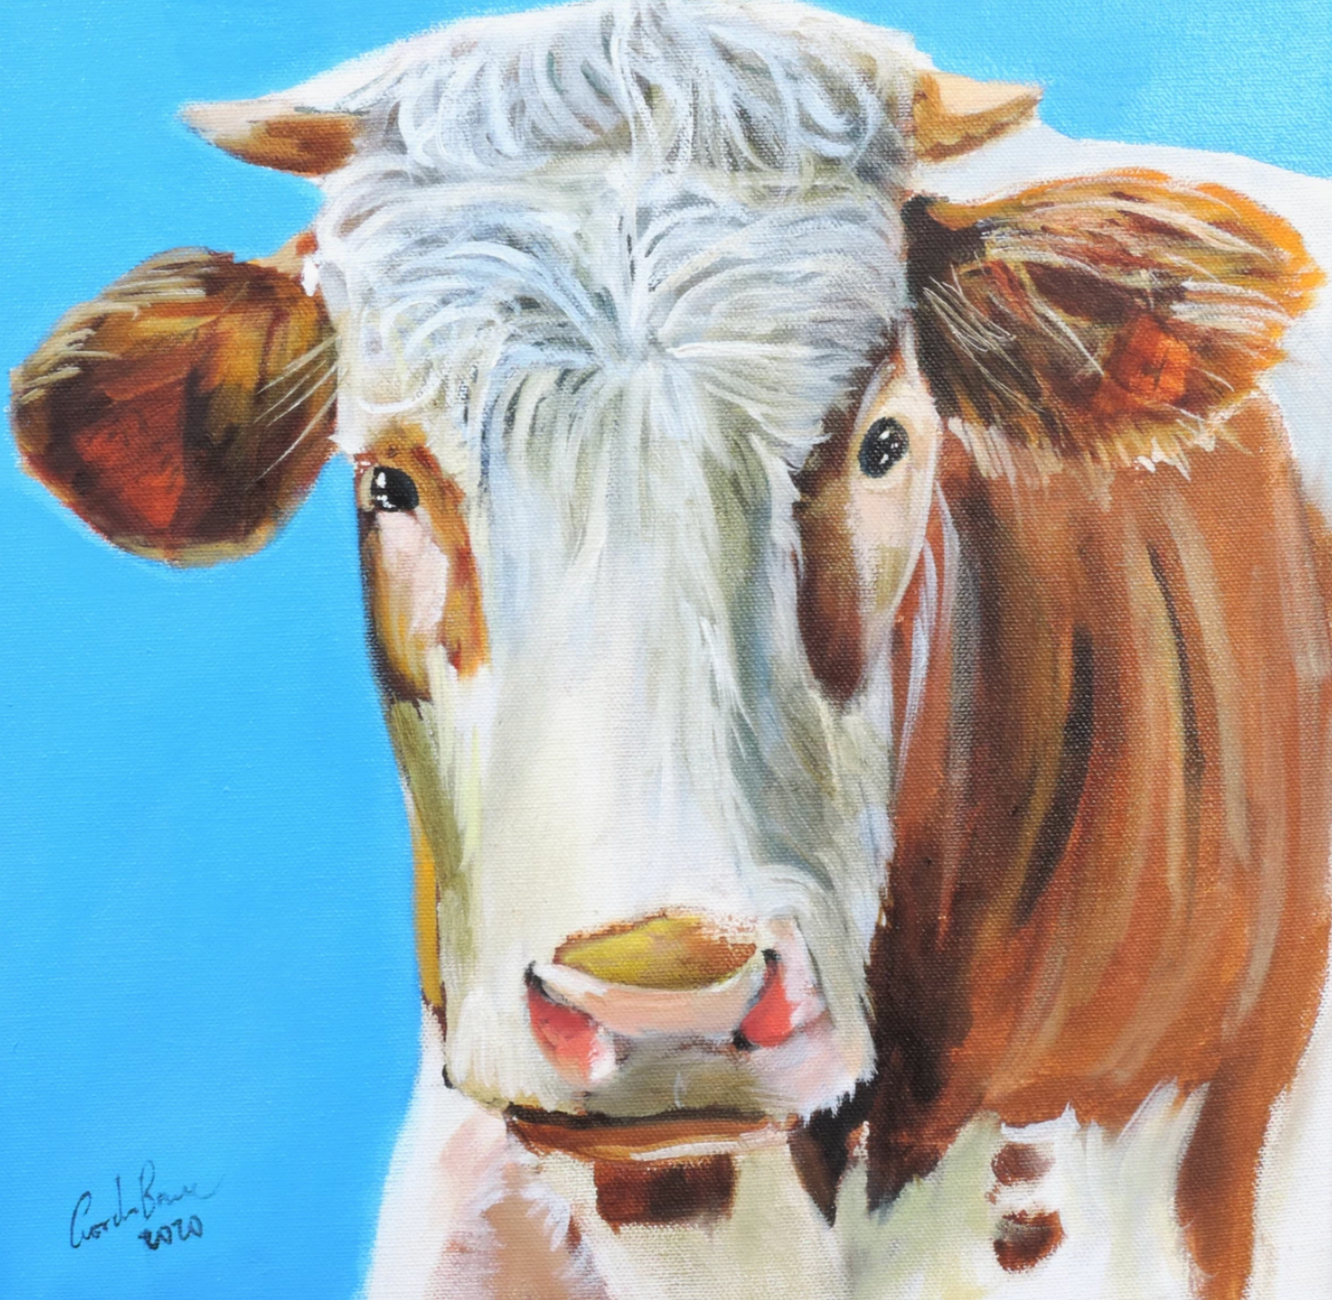 Cow painting a portrait in blue (2020)